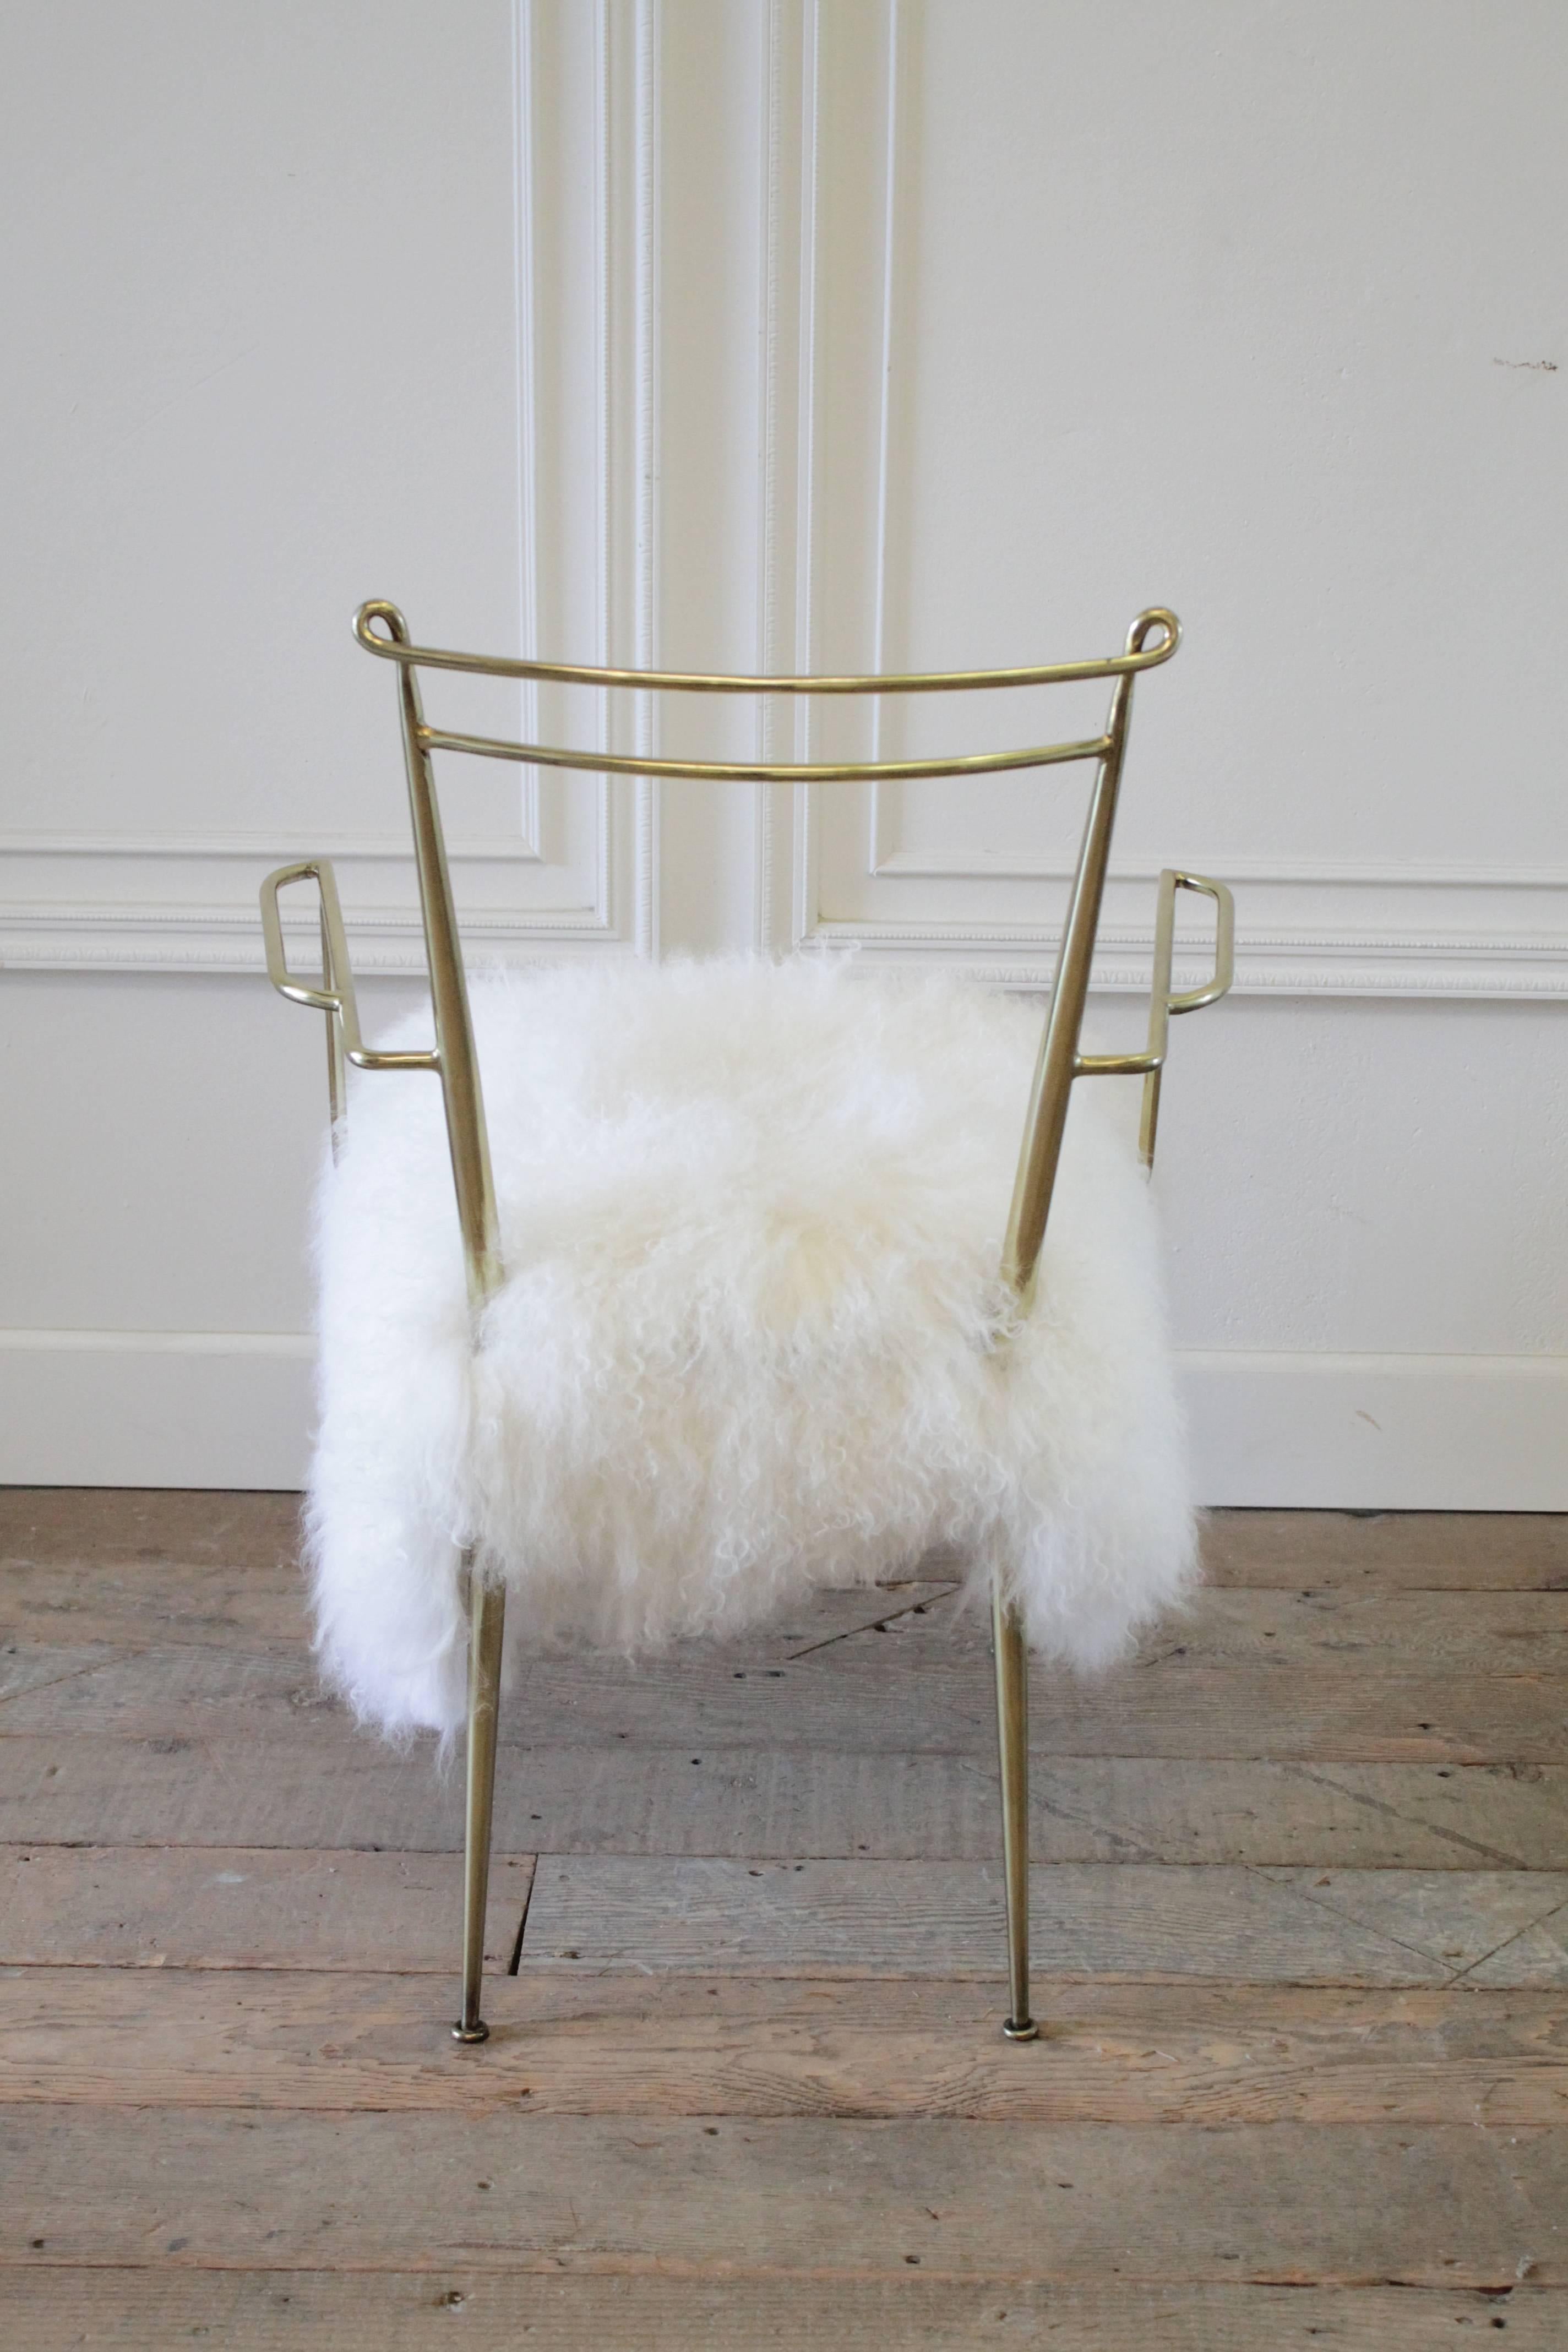 Vintage Brass Chair with Lambswool Upholstered Seat 1